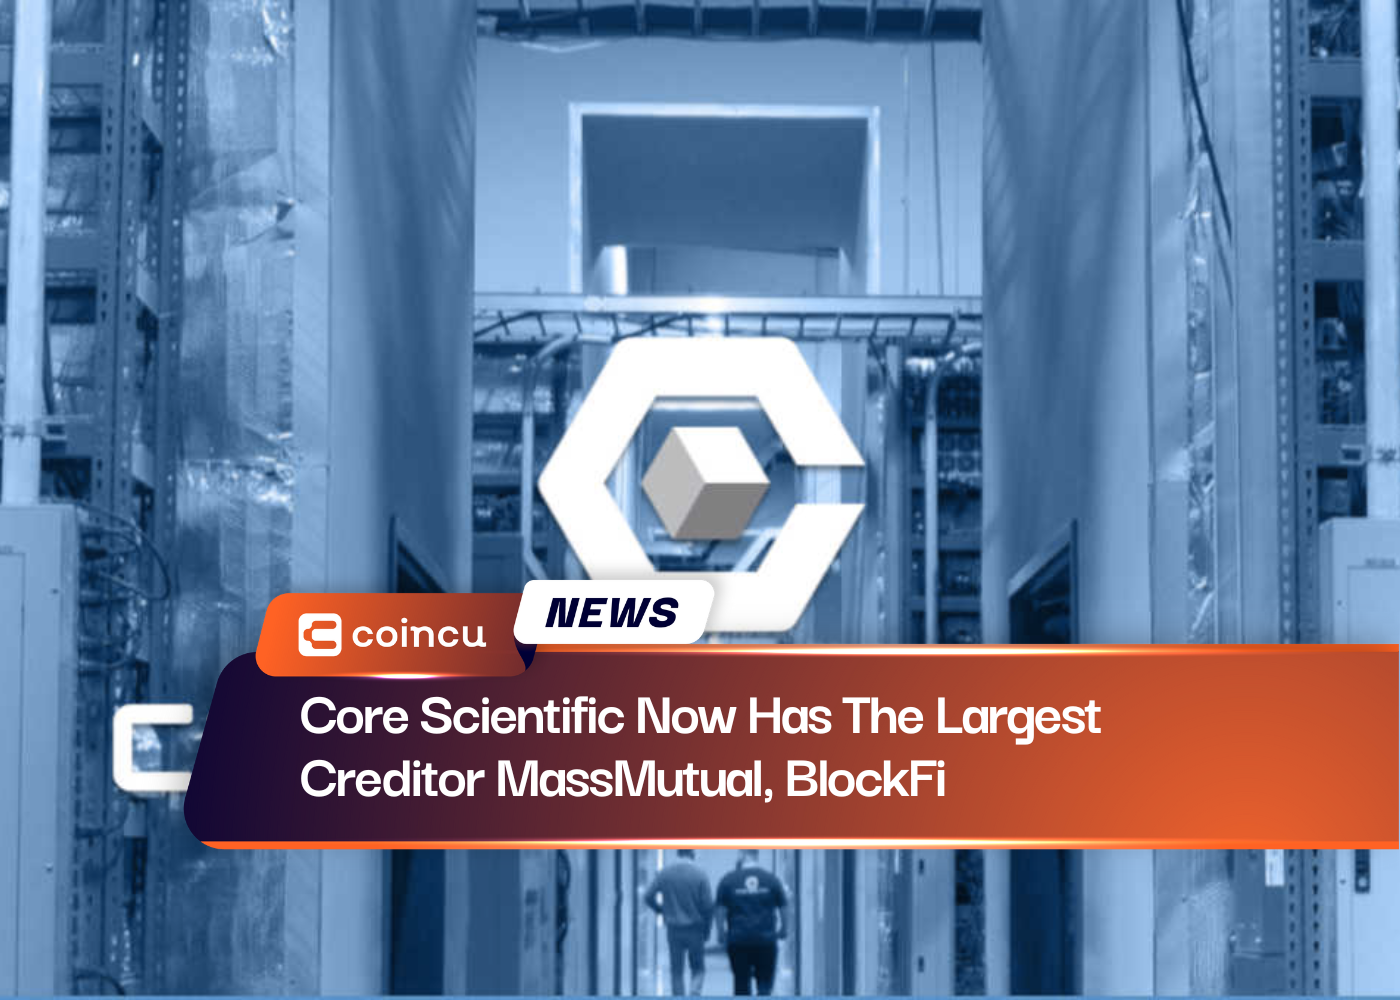 Core Scientific Now Has The Largest Creditor MassMutual, BlockFi